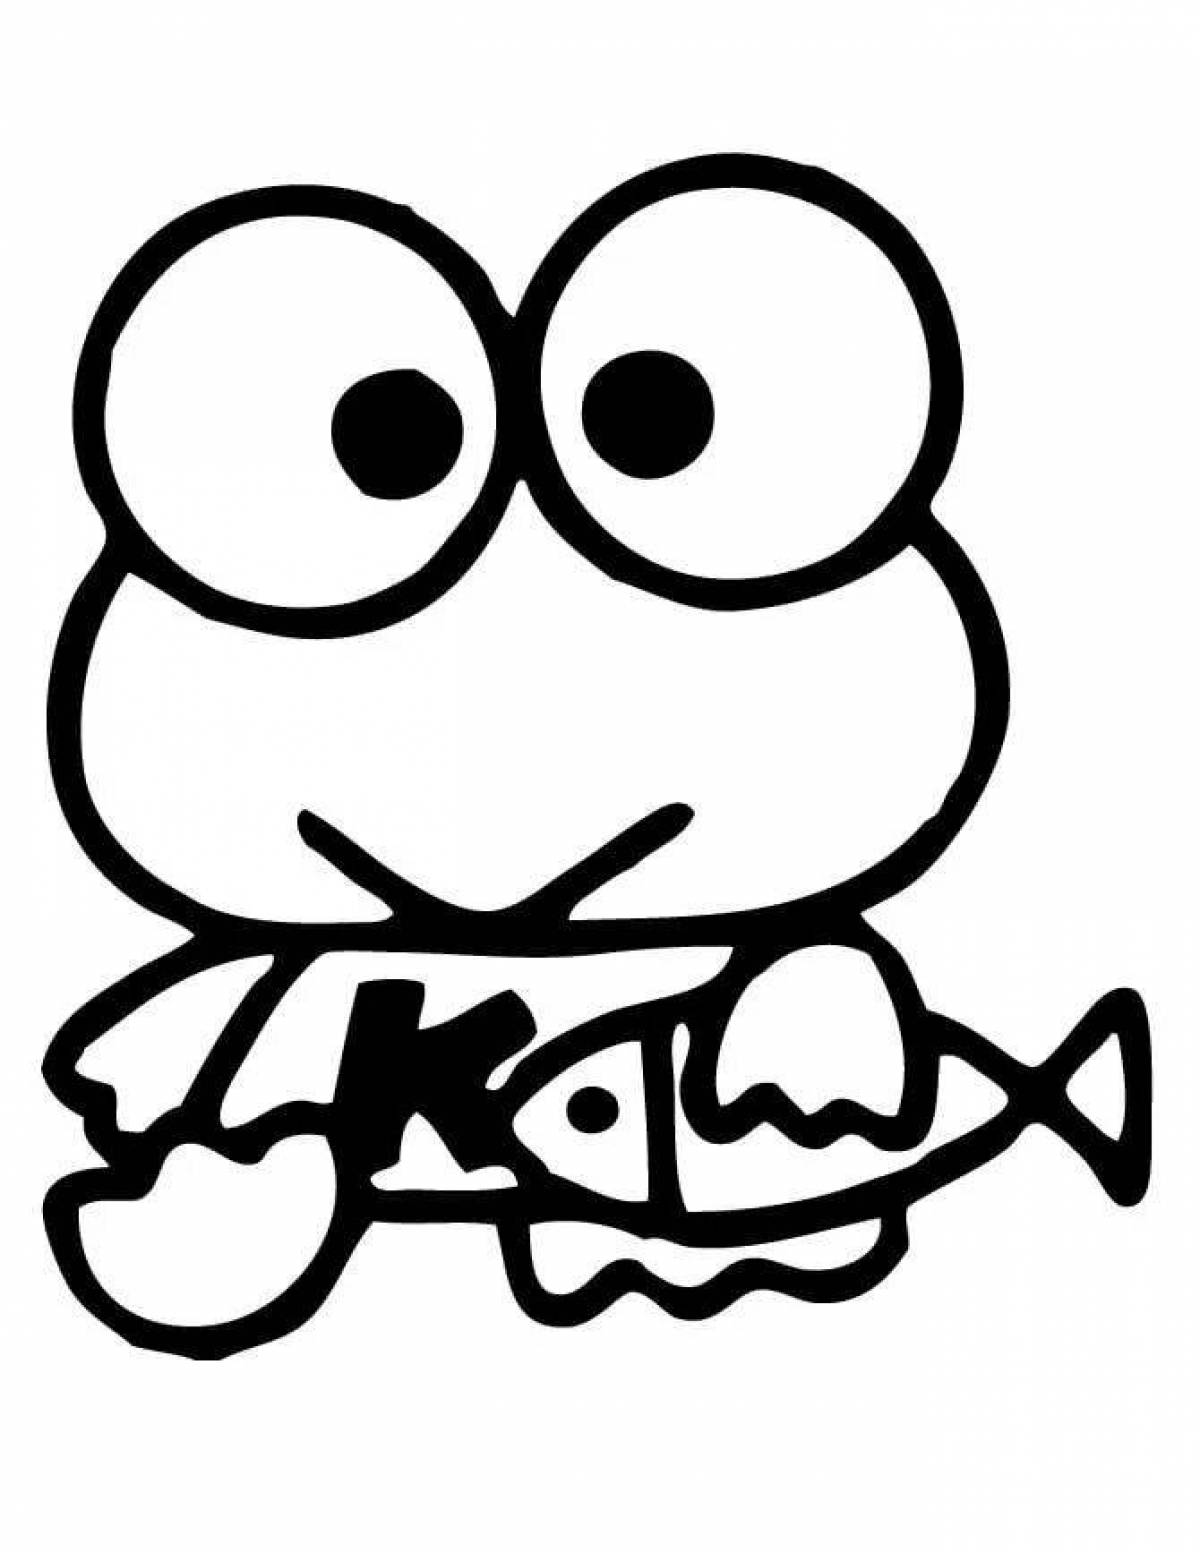 Playful hello kitty frog coloring page